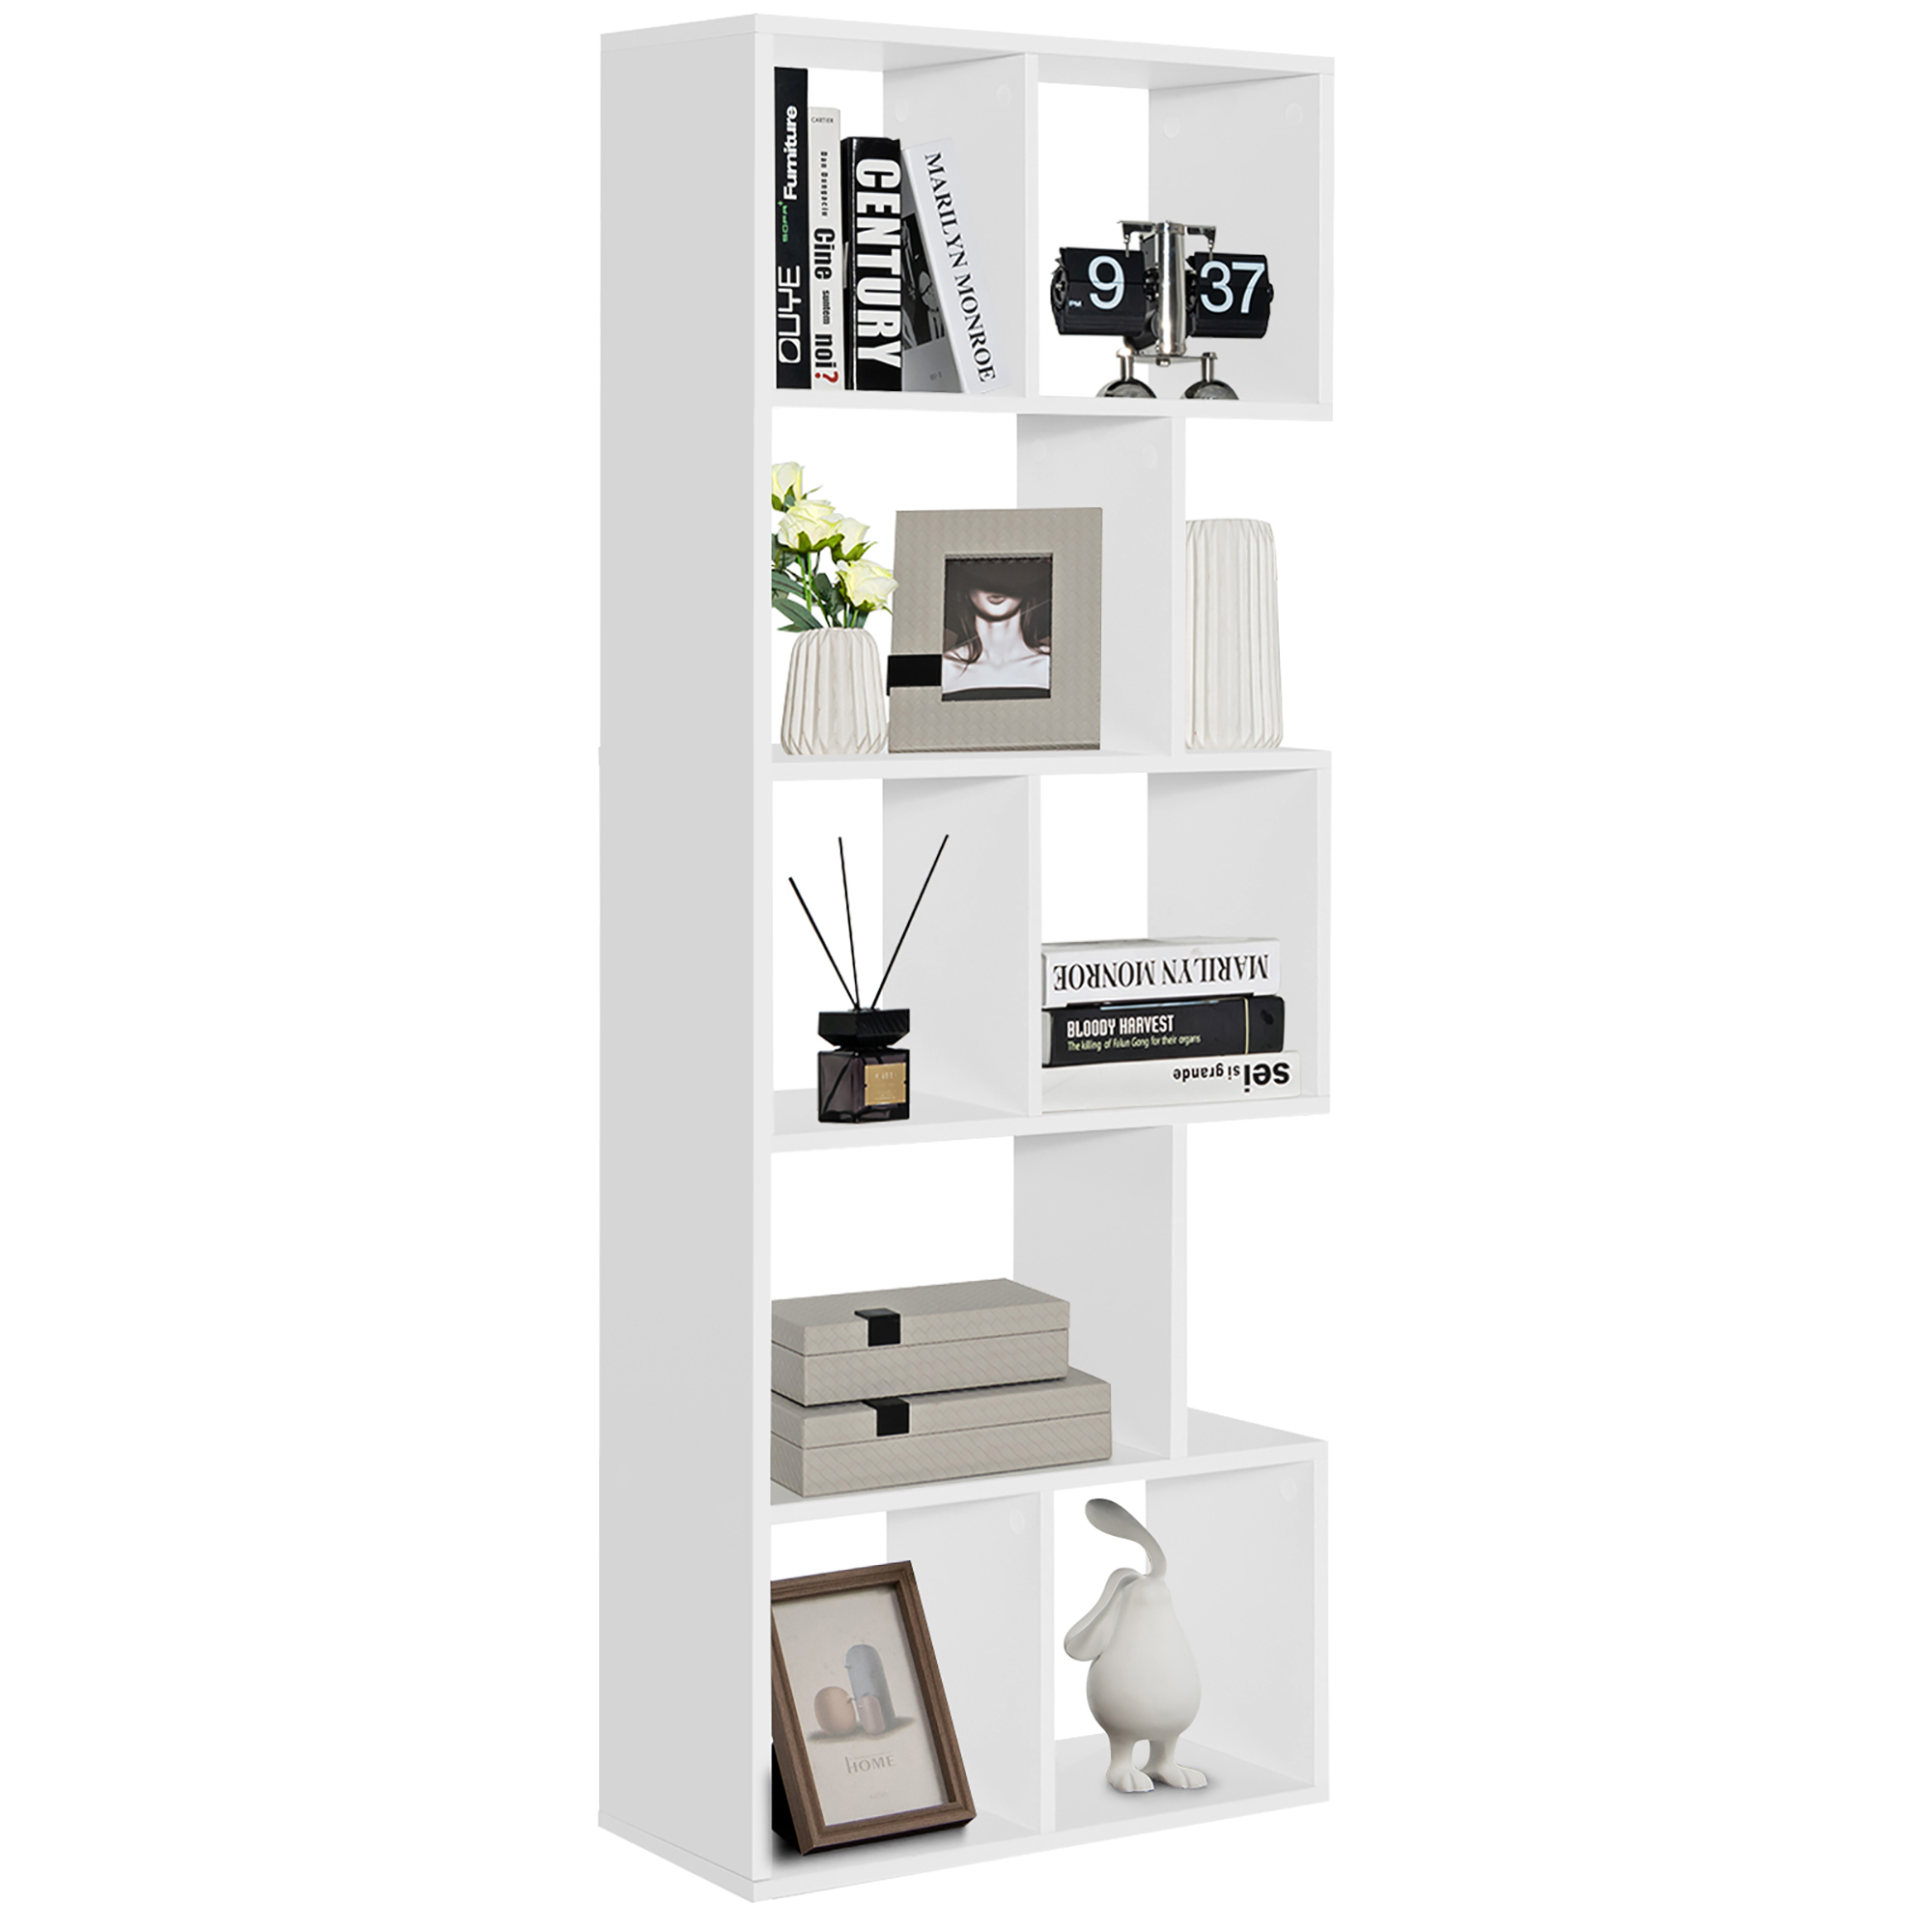 Costway 63'' Wooden 5-Tier Geometric Bookshelf S-shaped Display Shelf Stand Room Divider White - image 1 of 10